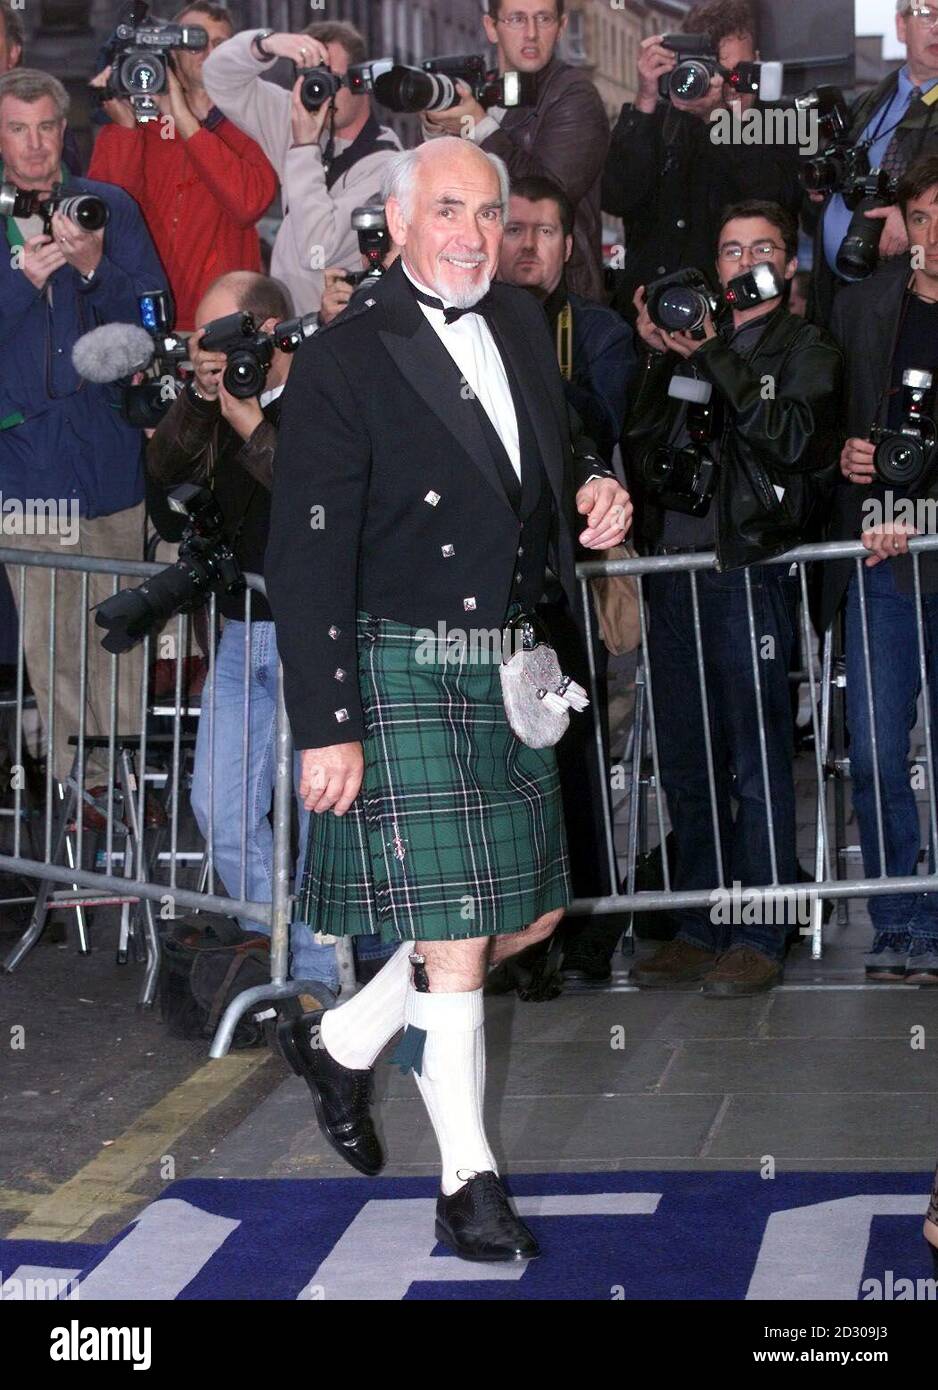 Film star Sean Connery's brother, Neil Connery, at Edinburgh's Odeon cinema at the UK premiere of the film 'Entrapment'. Stock Photo